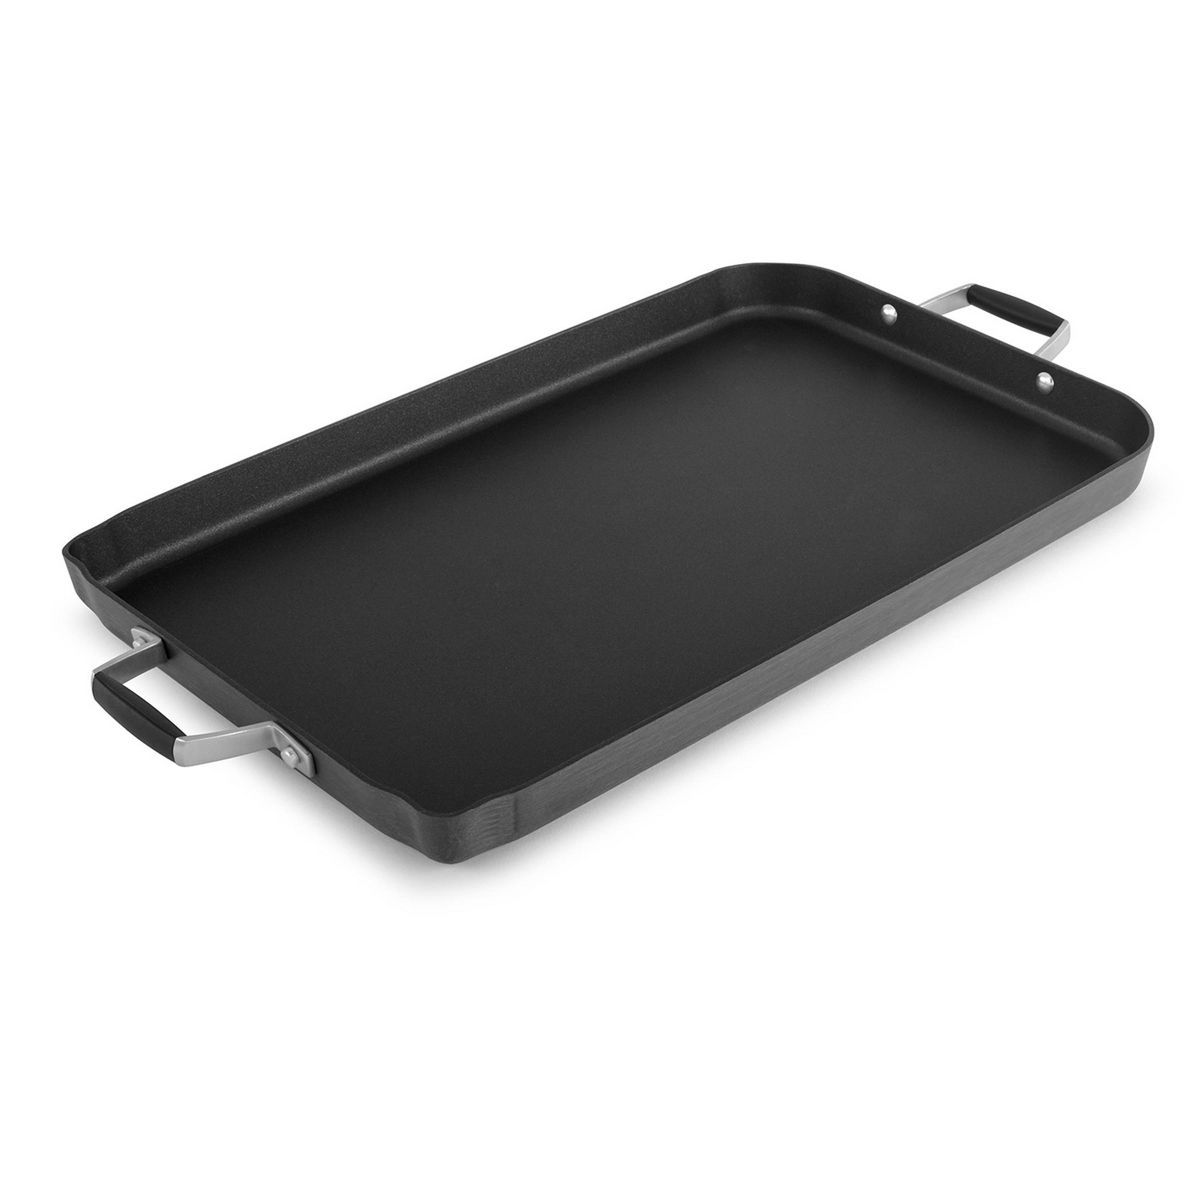 Select by Calphalon Nonstick with AquaShield Double Griddle | Target